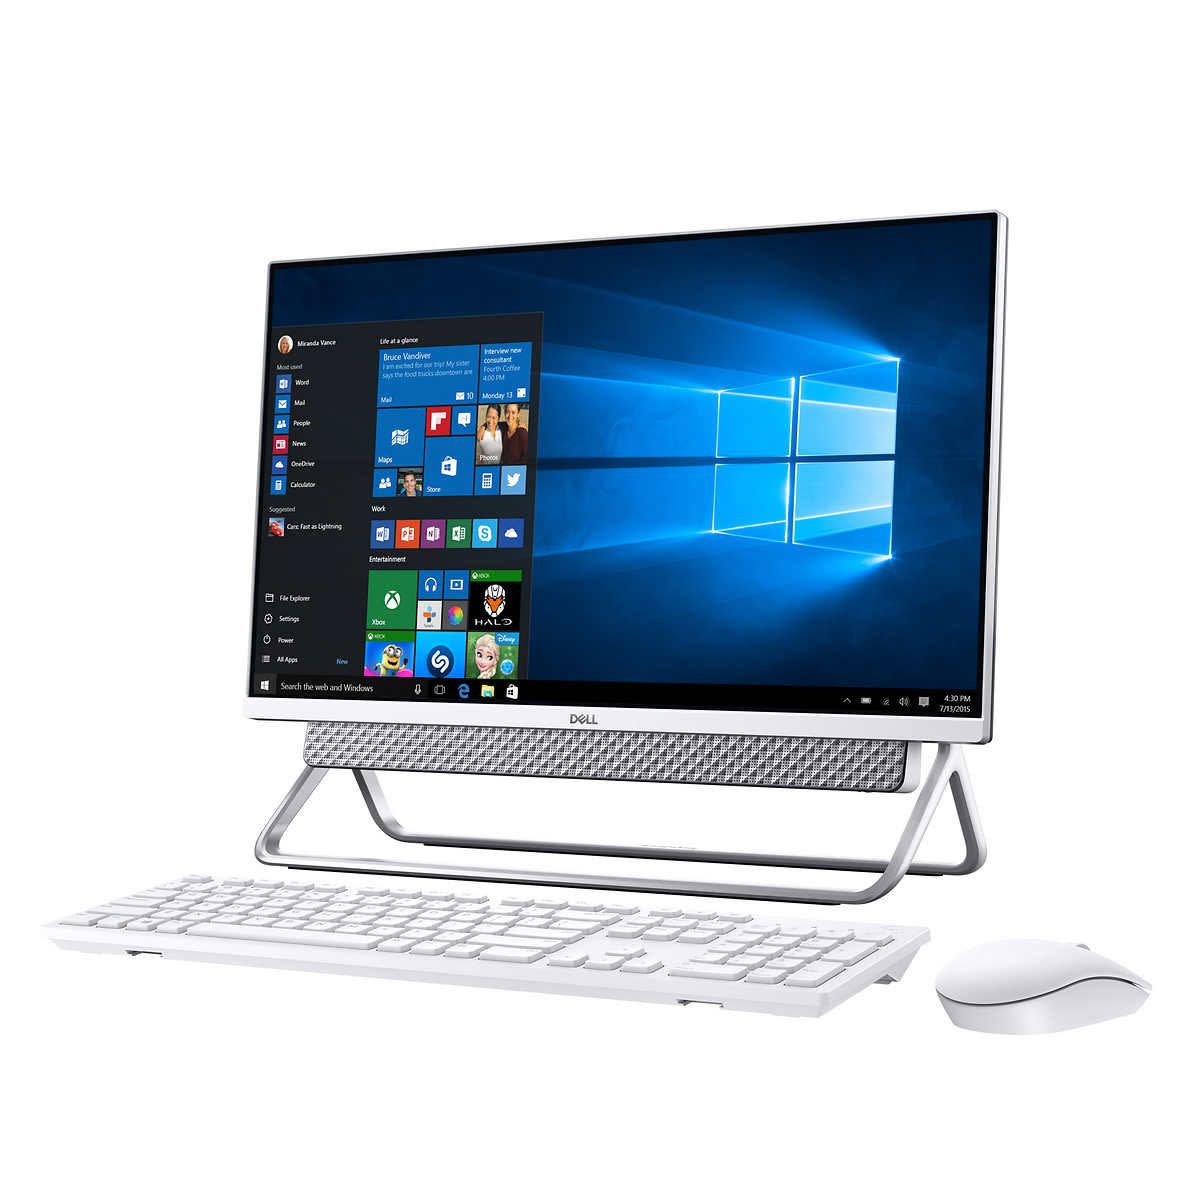 Dell Inspiron 24 5000 Series Touchscreen All-in-One Desktop